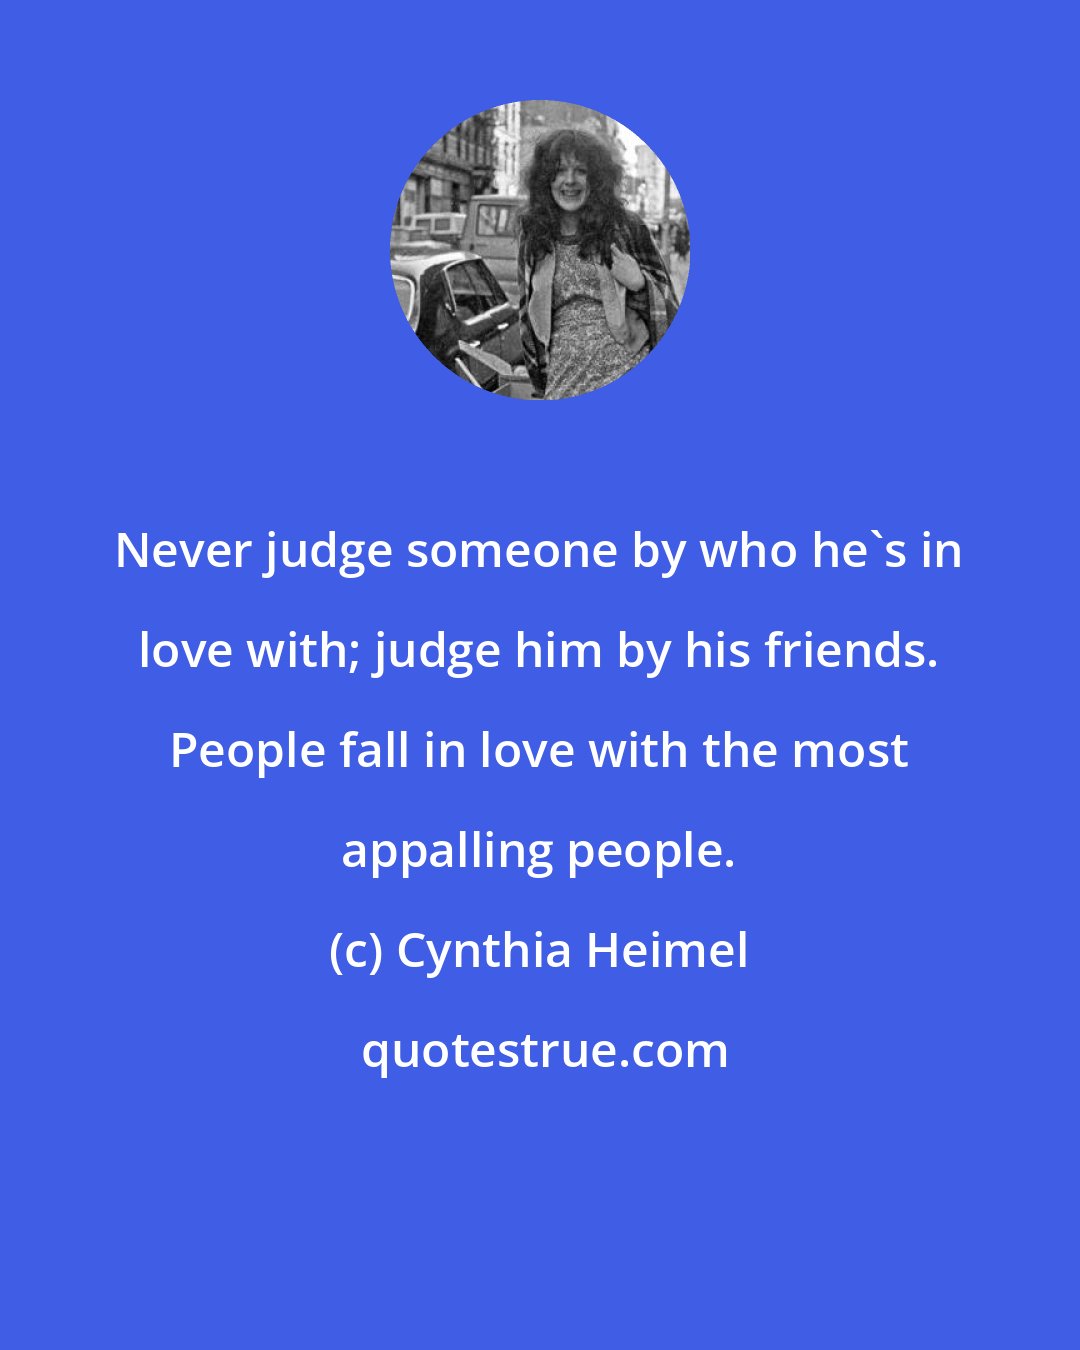 Cynthia Heimel: Never judge someone by who he's in love with; judge him by his friends. People fall in love with the most appalling people.